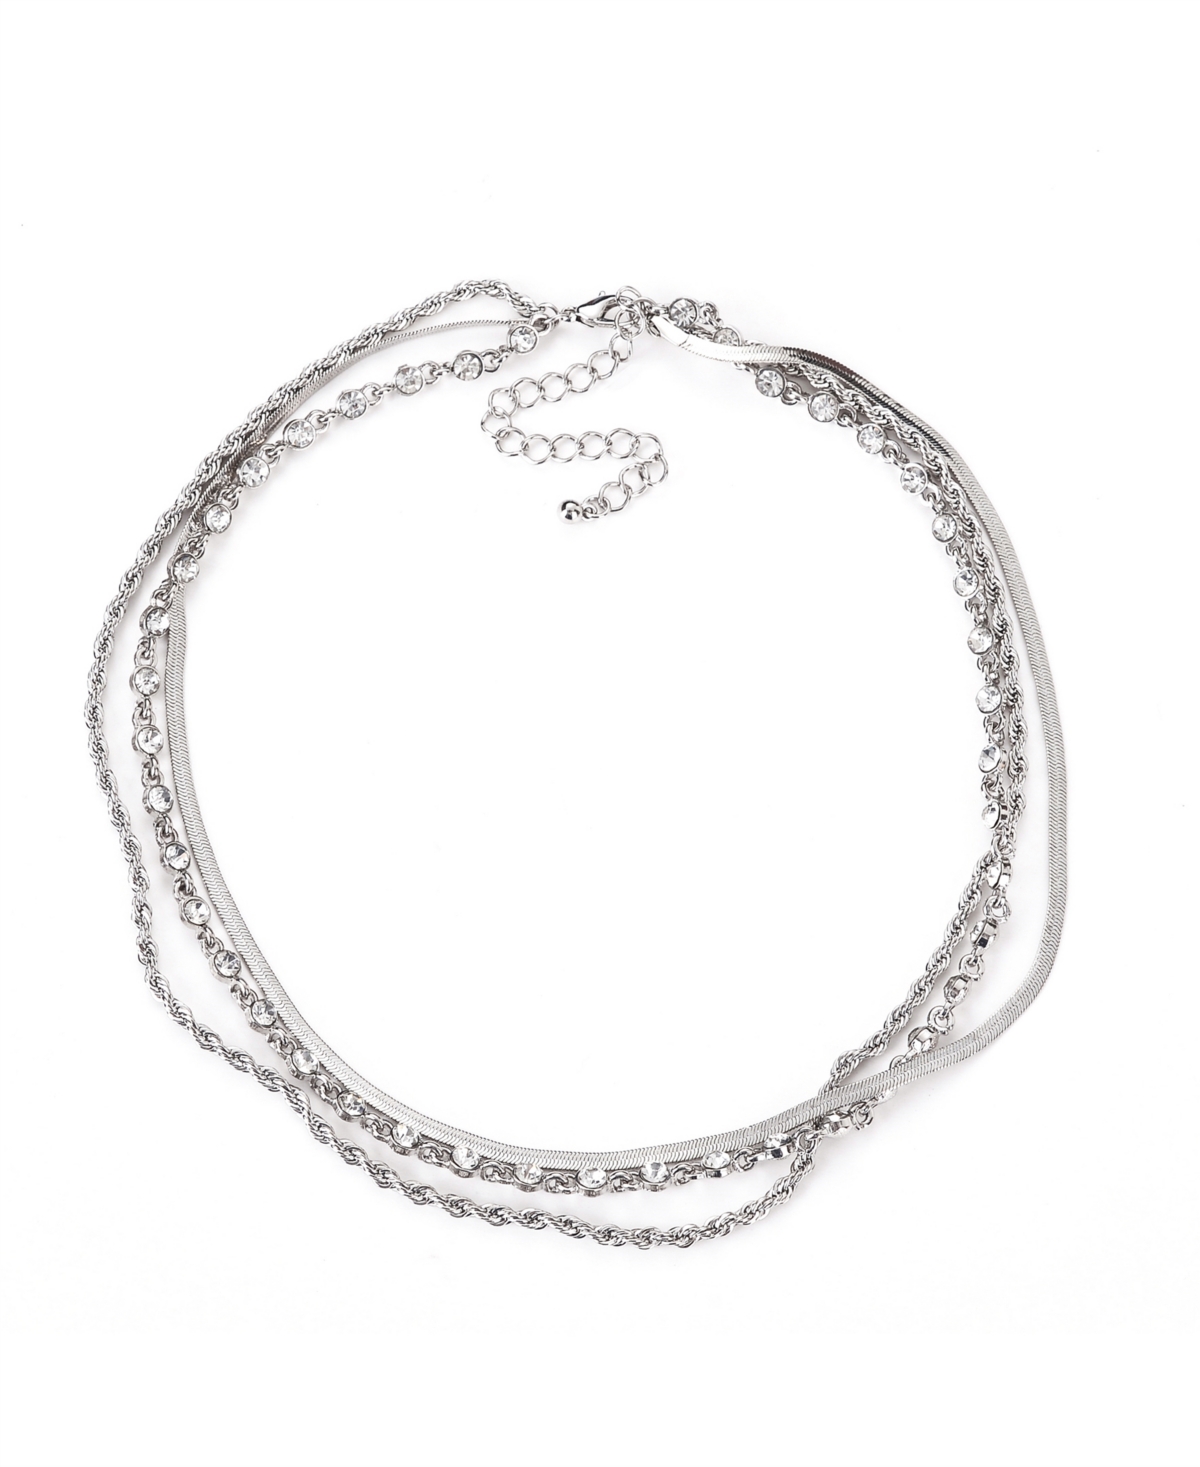 Nicole Miller Layered Chain And Rhinestone Necklace In Silver-tone/crystal